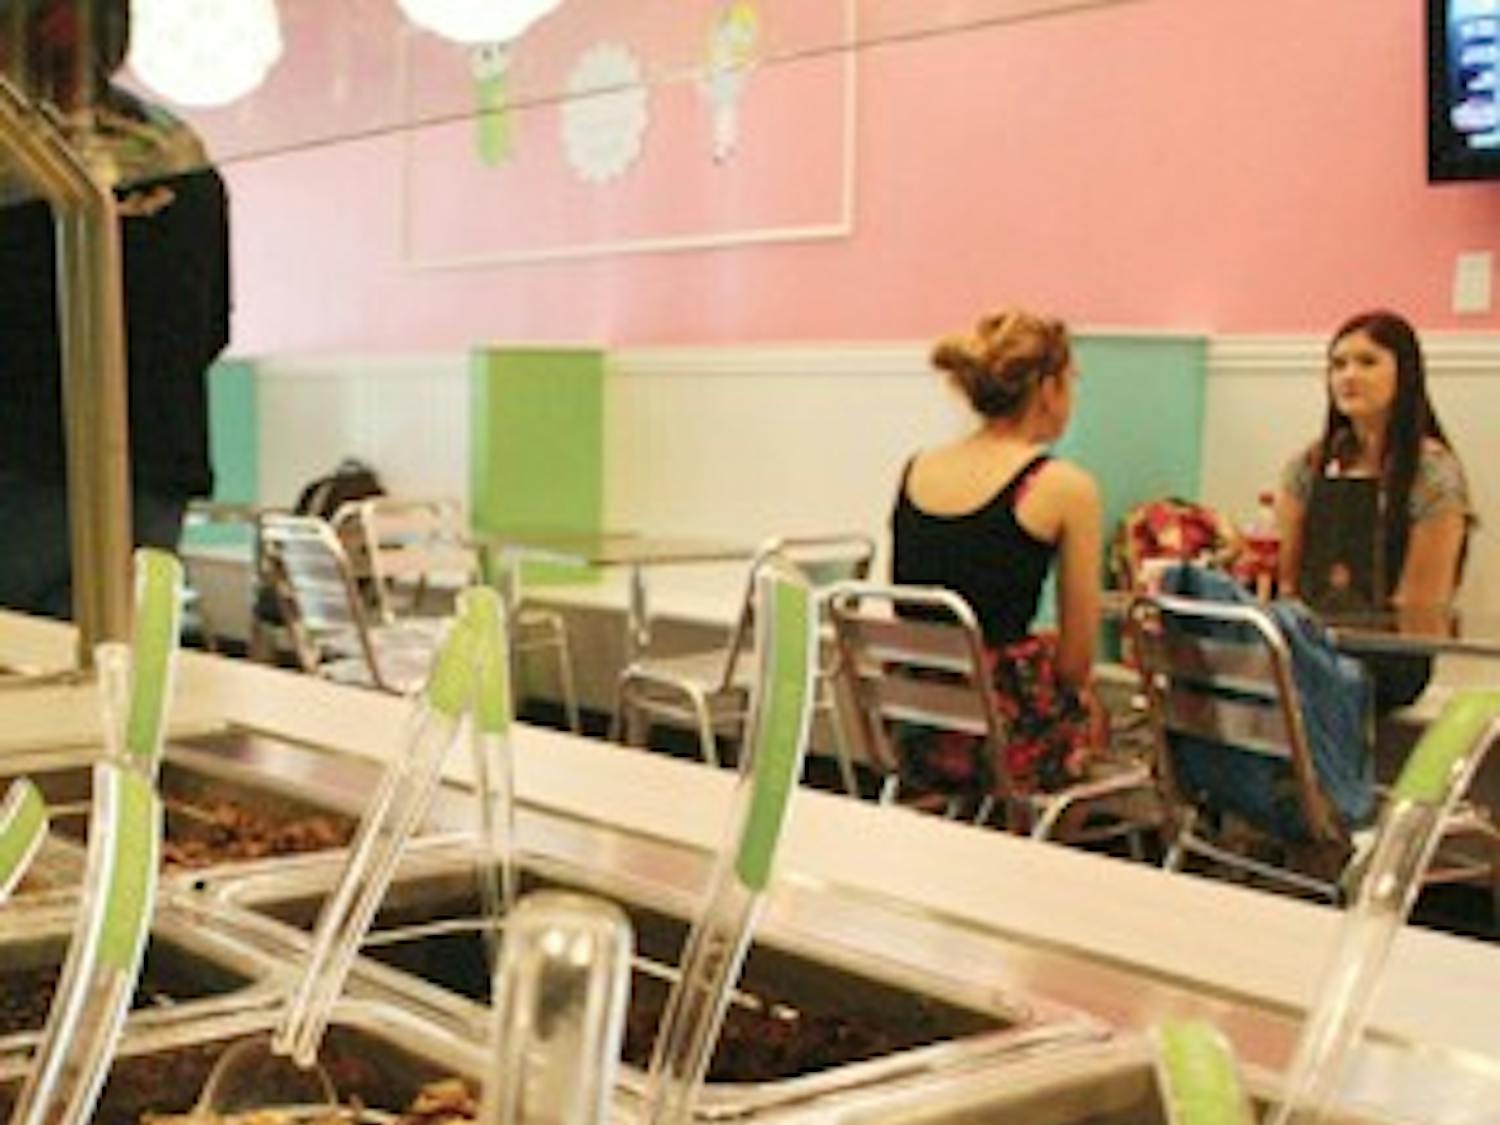 A selection of frozen yogurt toppings is available at Sweet Frog.